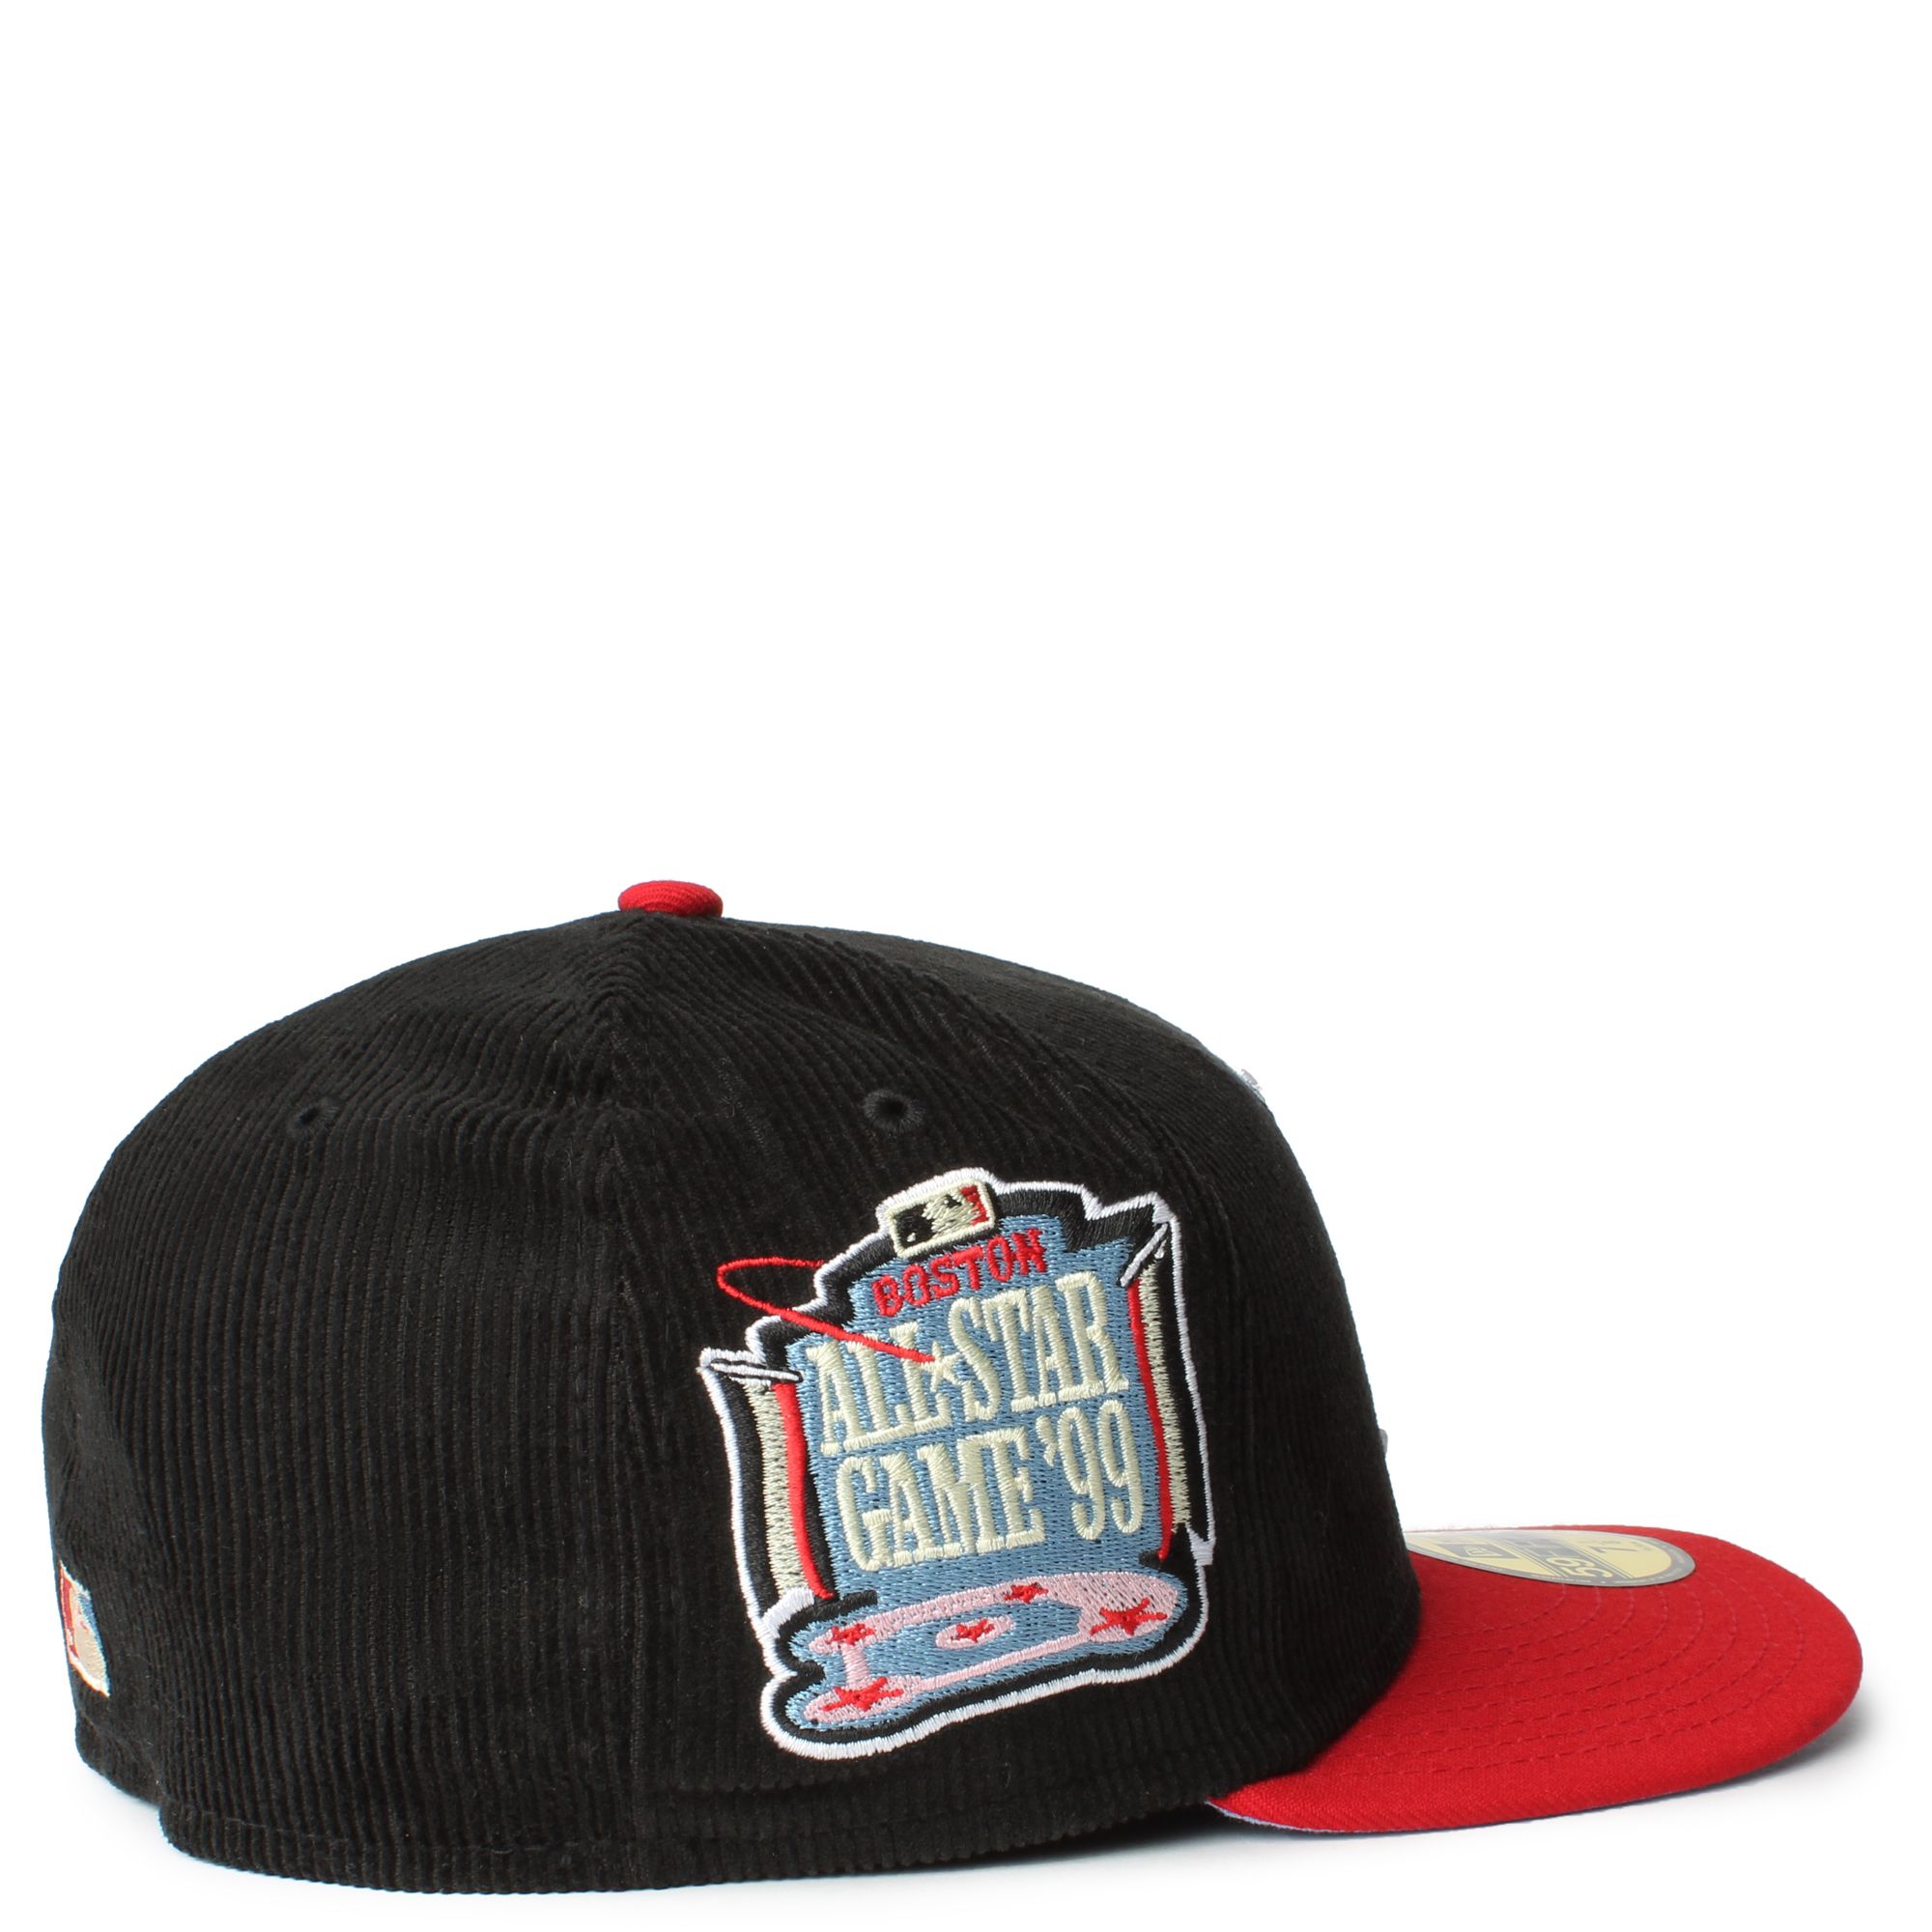 New Era Caps Boston Red Sox 59FIFTY Corduroy Fitted Hat